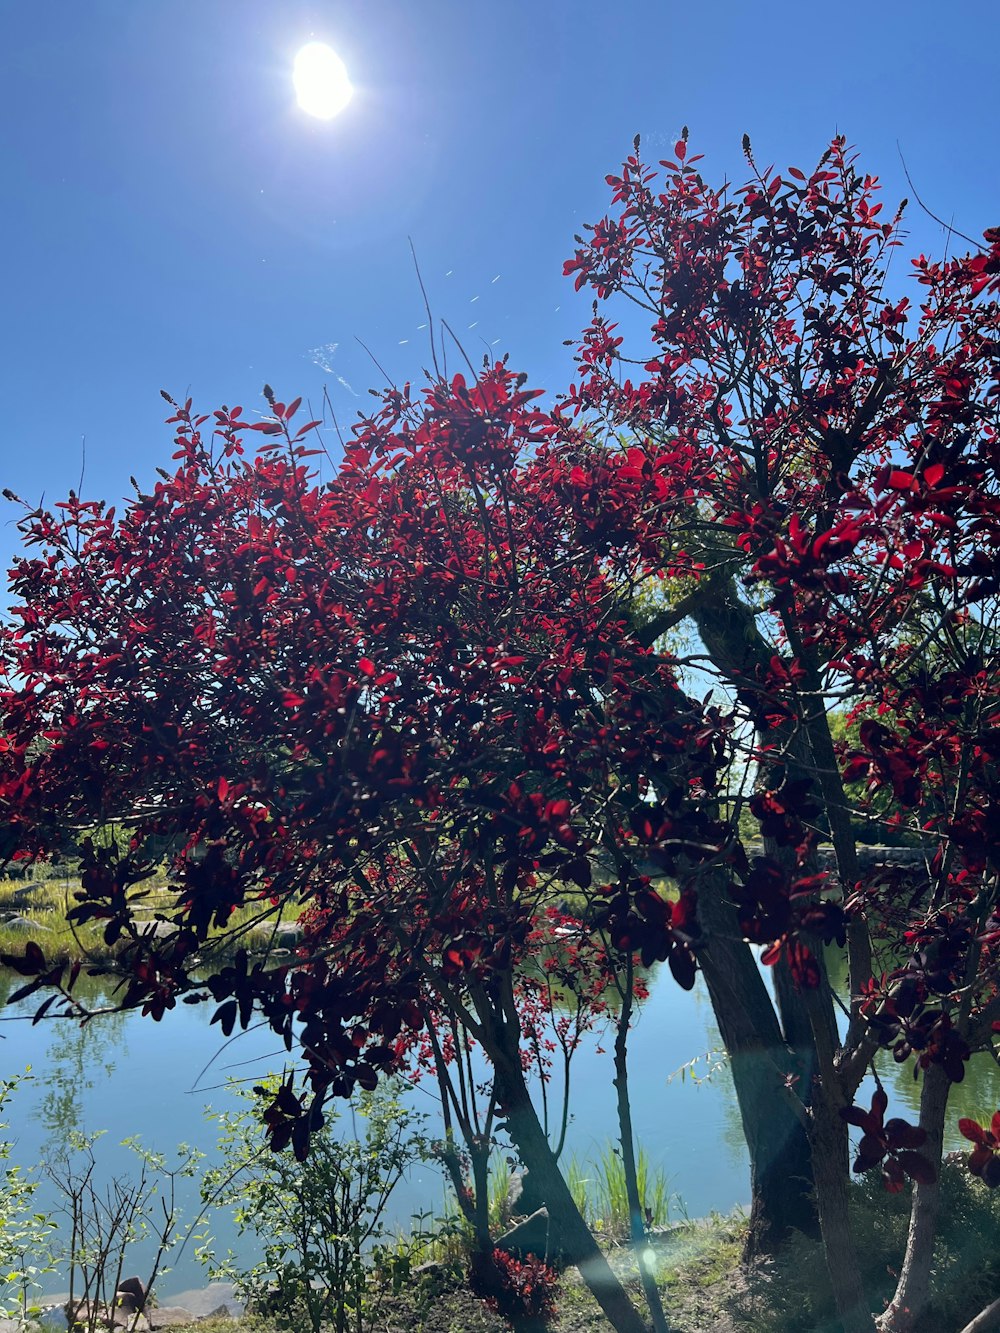 a tree with red flowers near a body of water